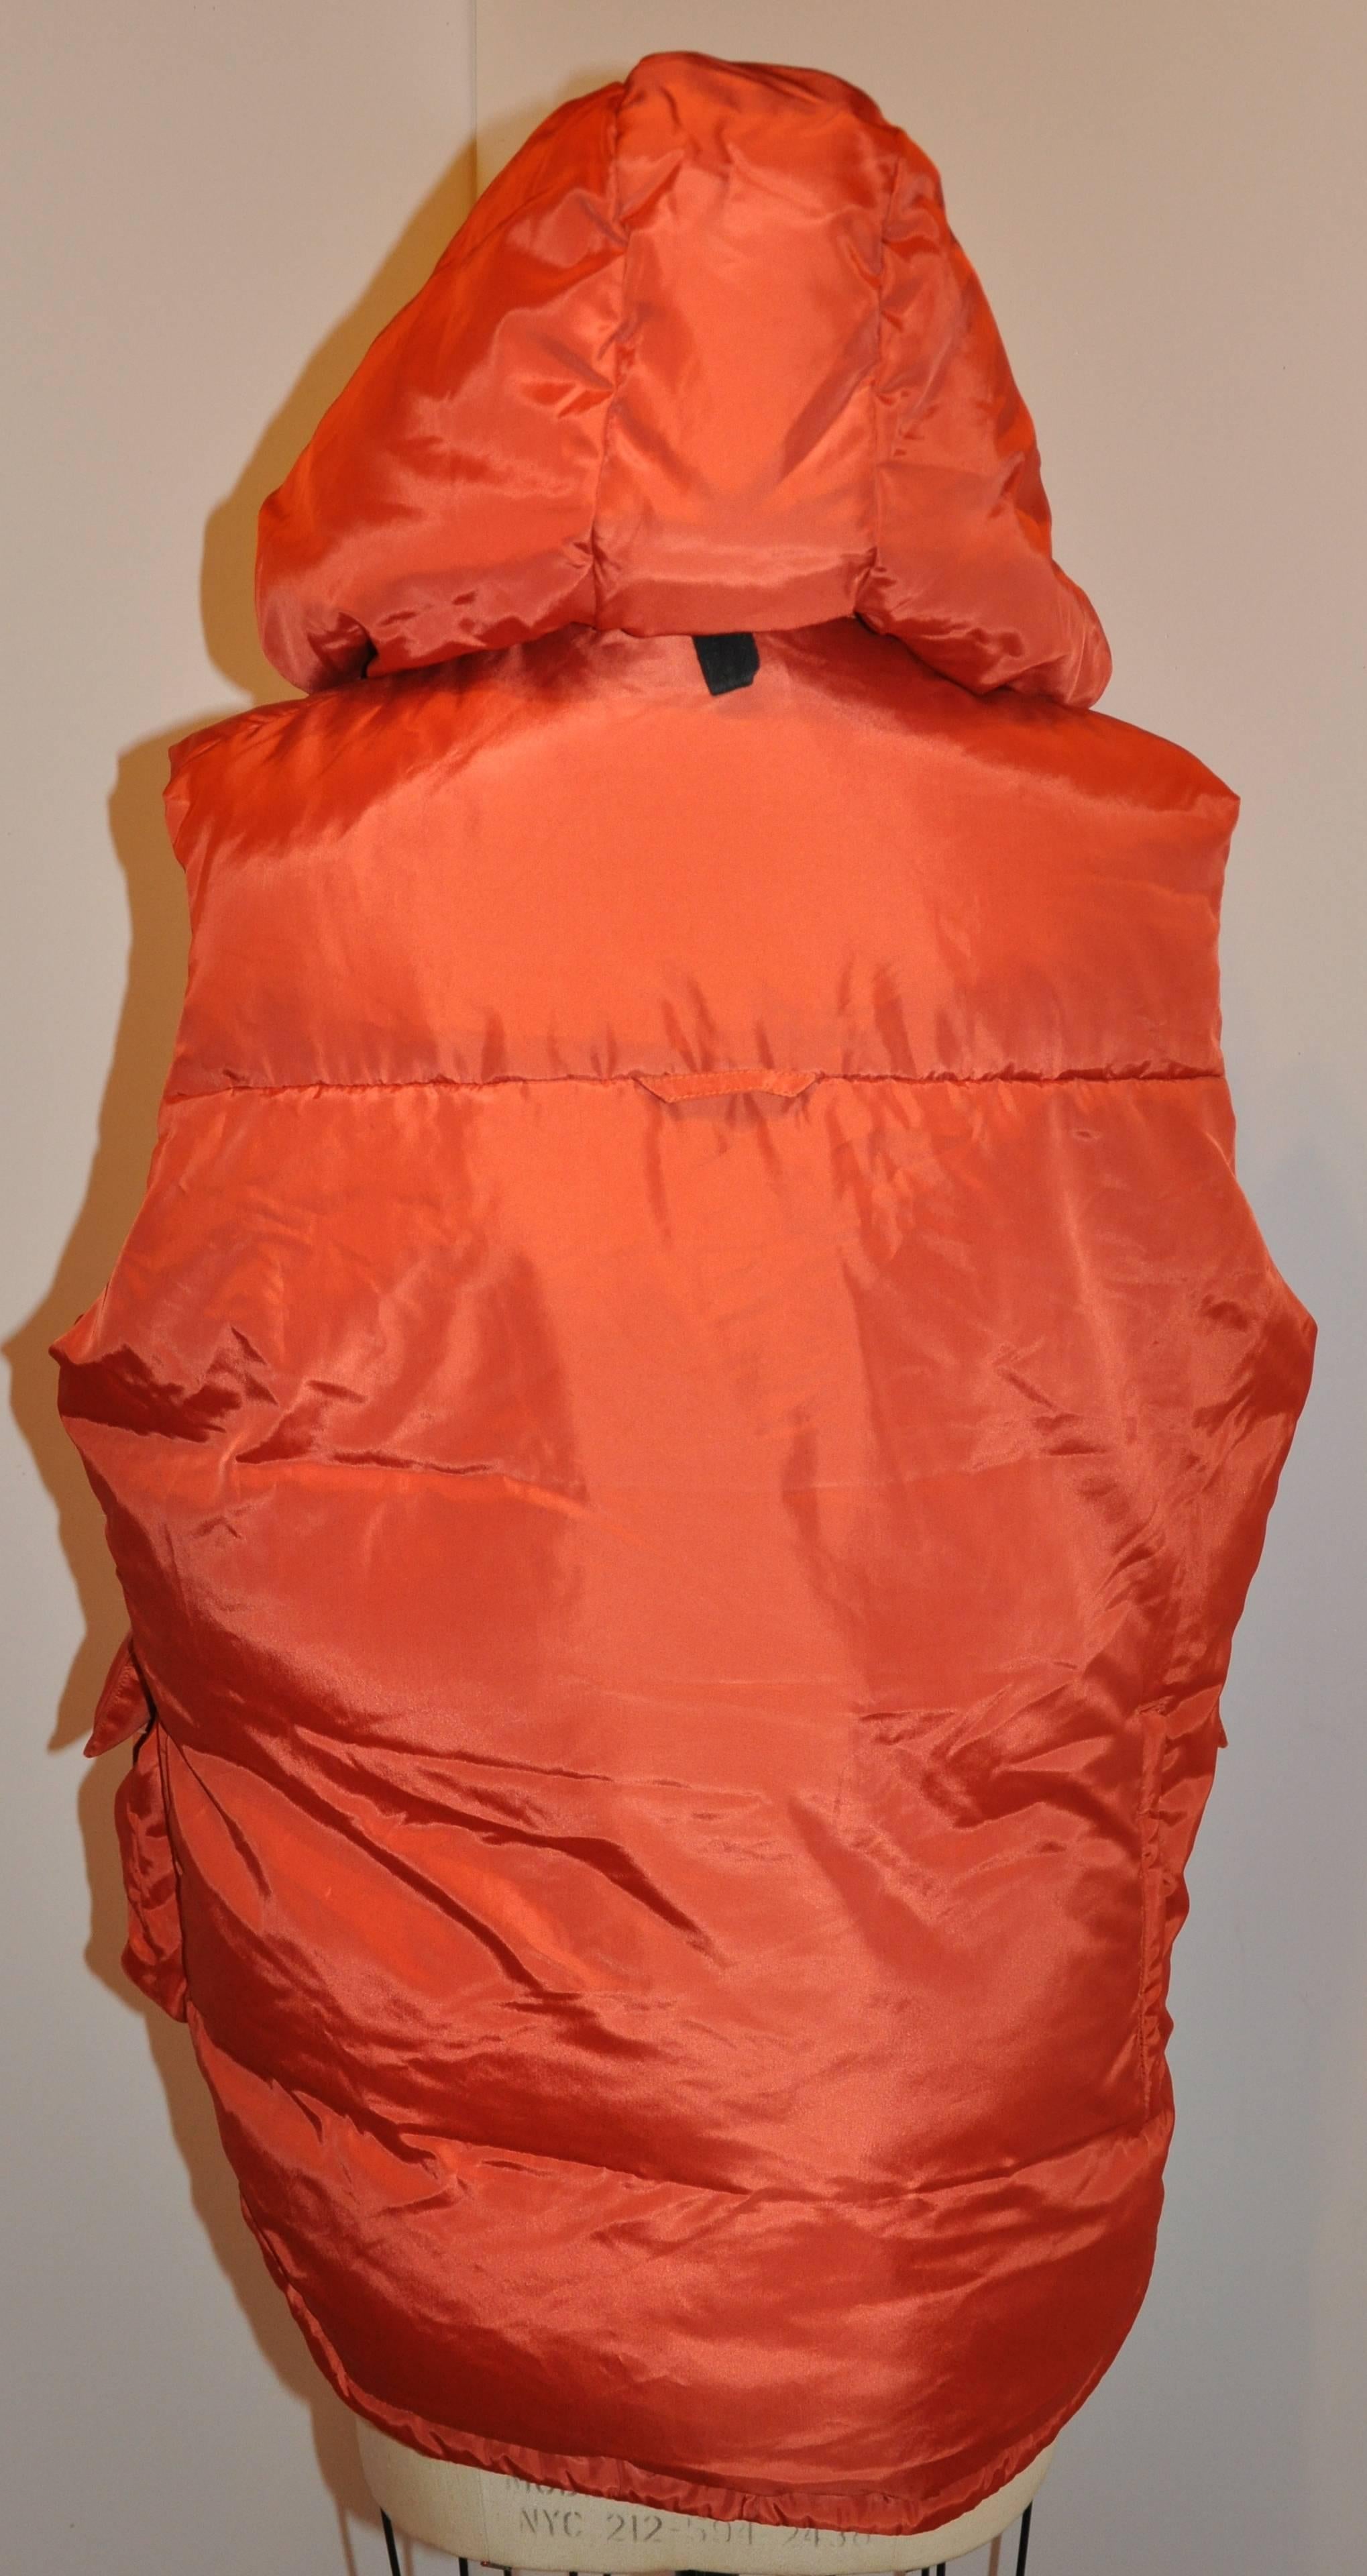          Yoshji Yamamoto wonderfully bold tangerine men's zippered down-filled vest has a removable zippered hood. The hood is accented with two snaps in front to use when needed. The front has two large patch zippered top pockets as well as a